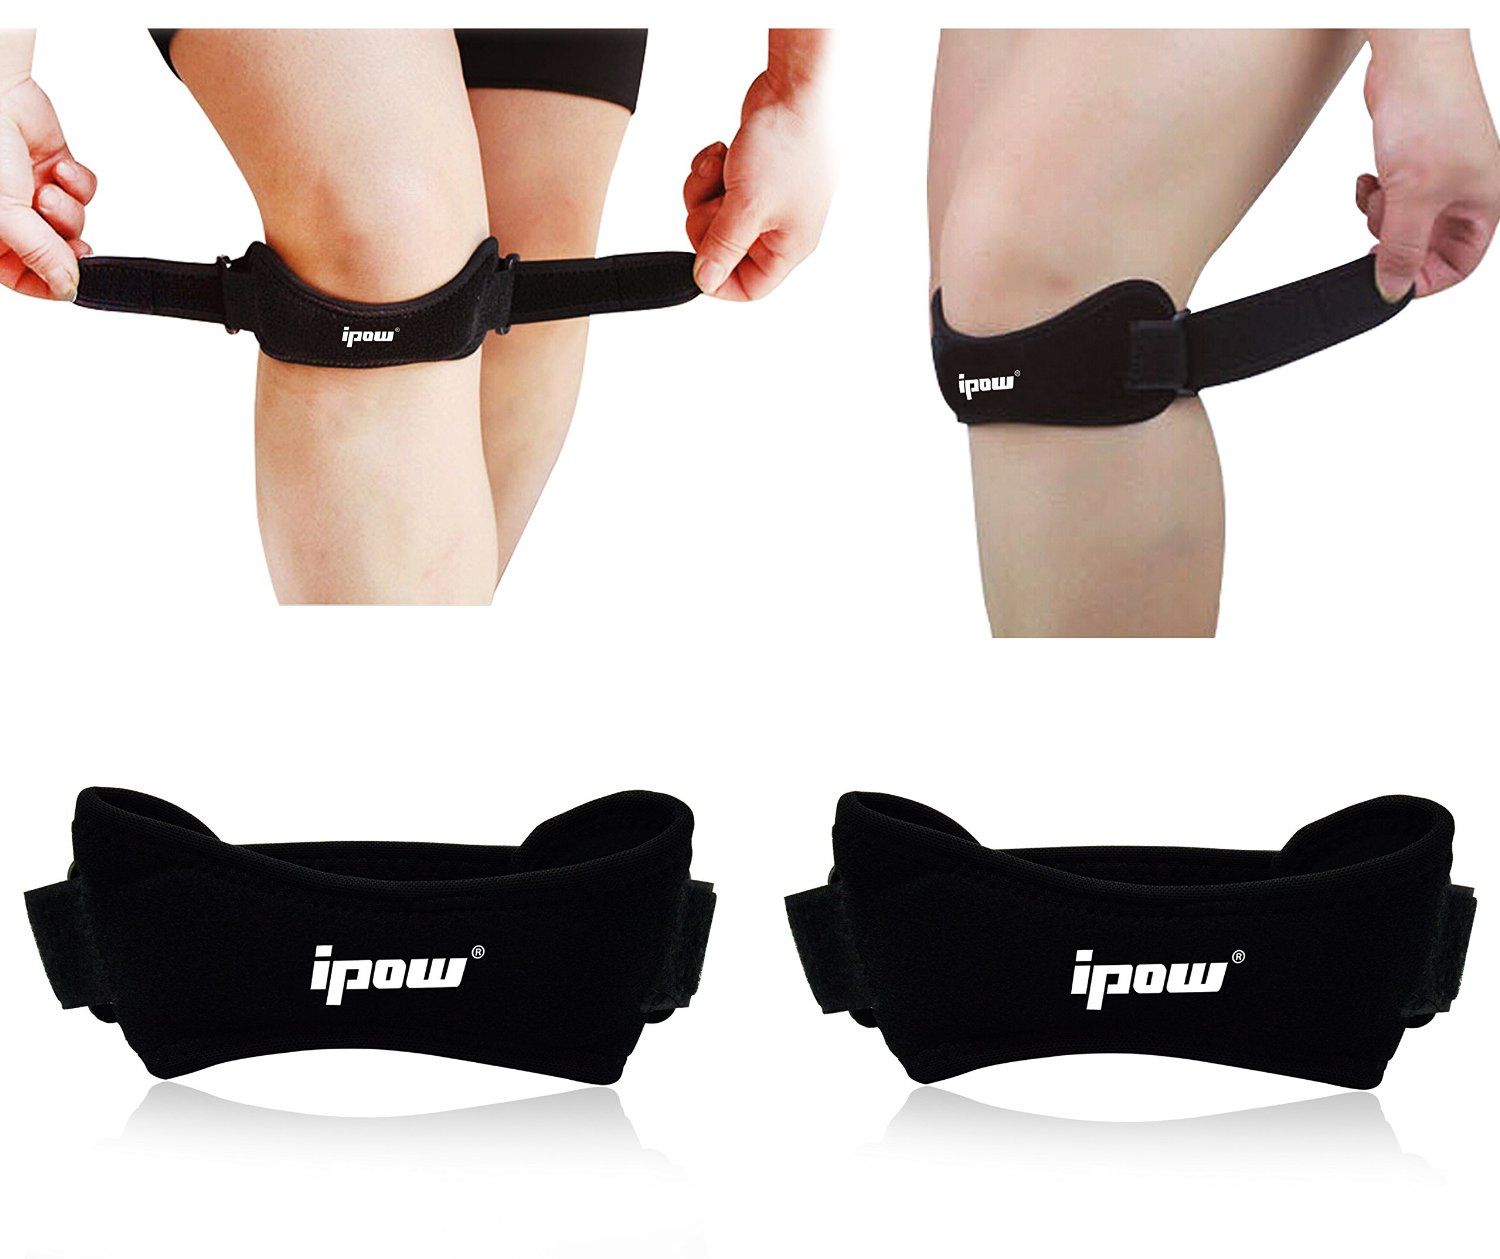 ipow knee strap instructions